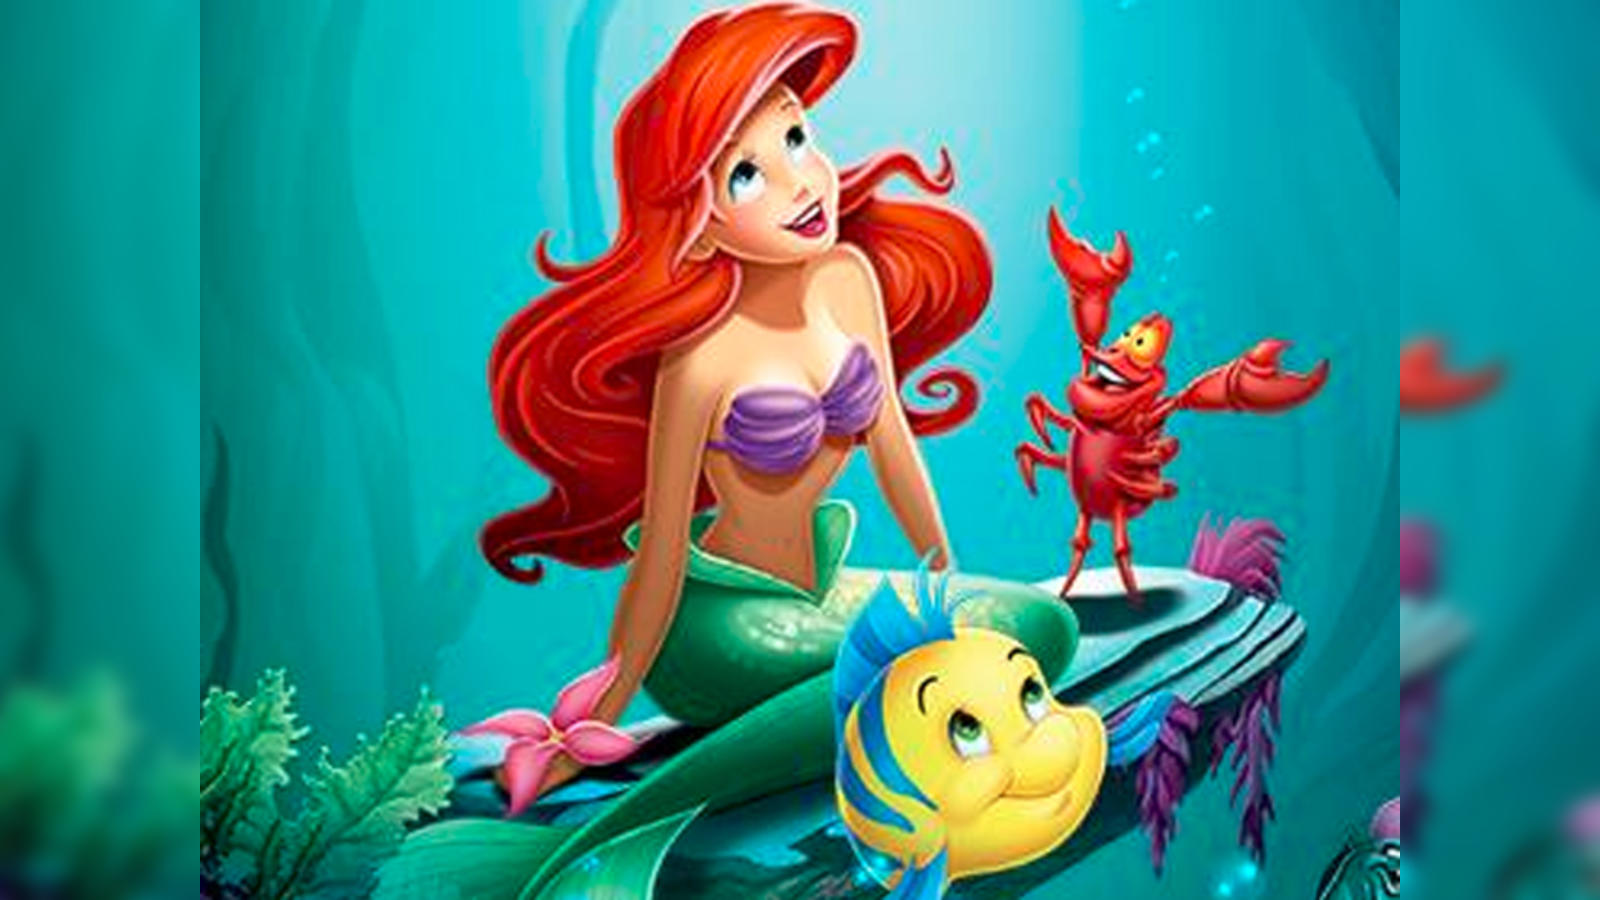 Disney to make live-action version of 'The Little Mermaid' - The